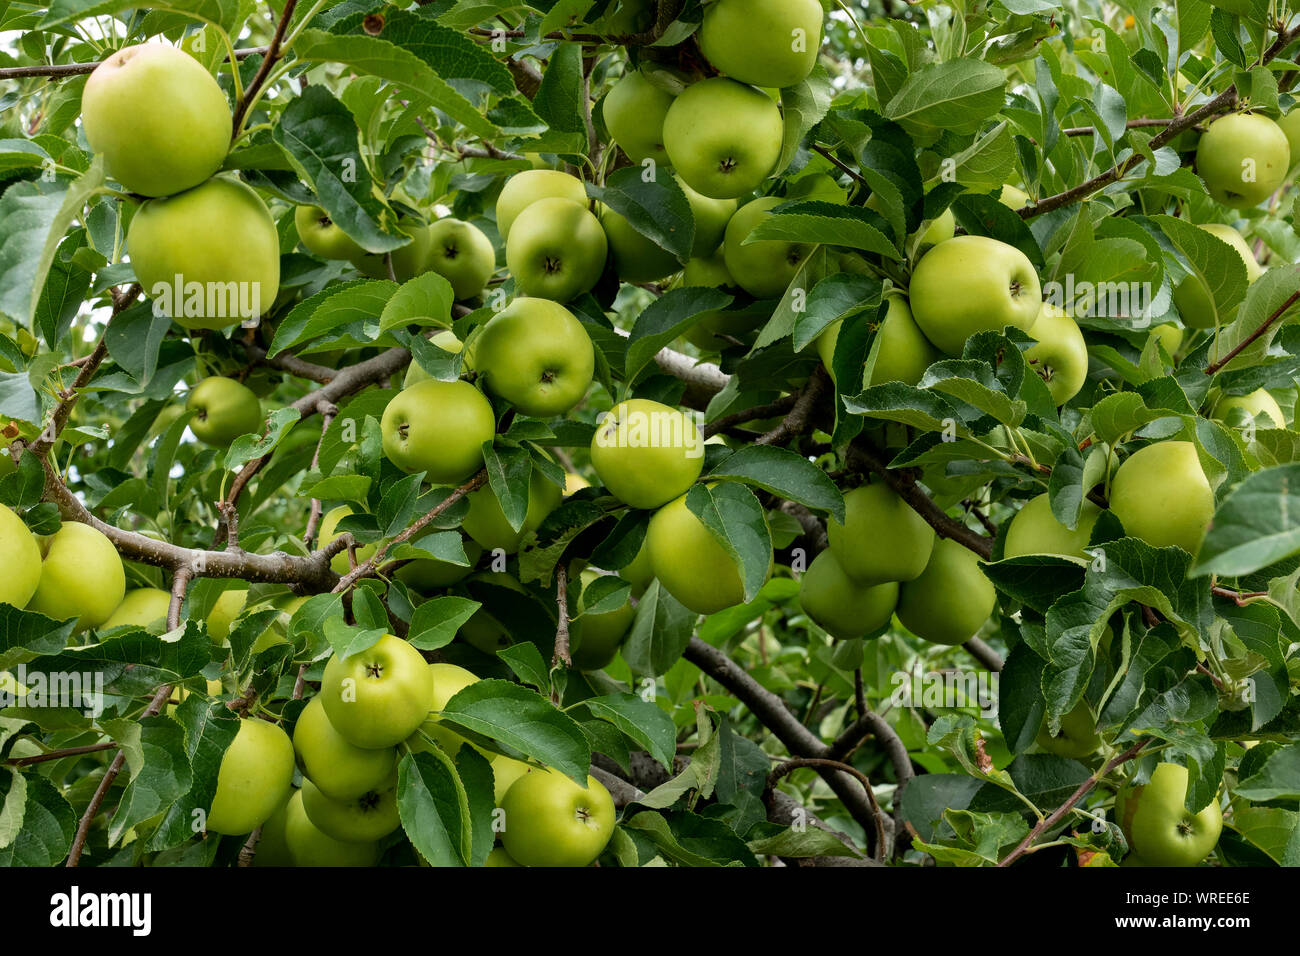 Organic apples hanging from a tree branch in an organic garden Stock Photo